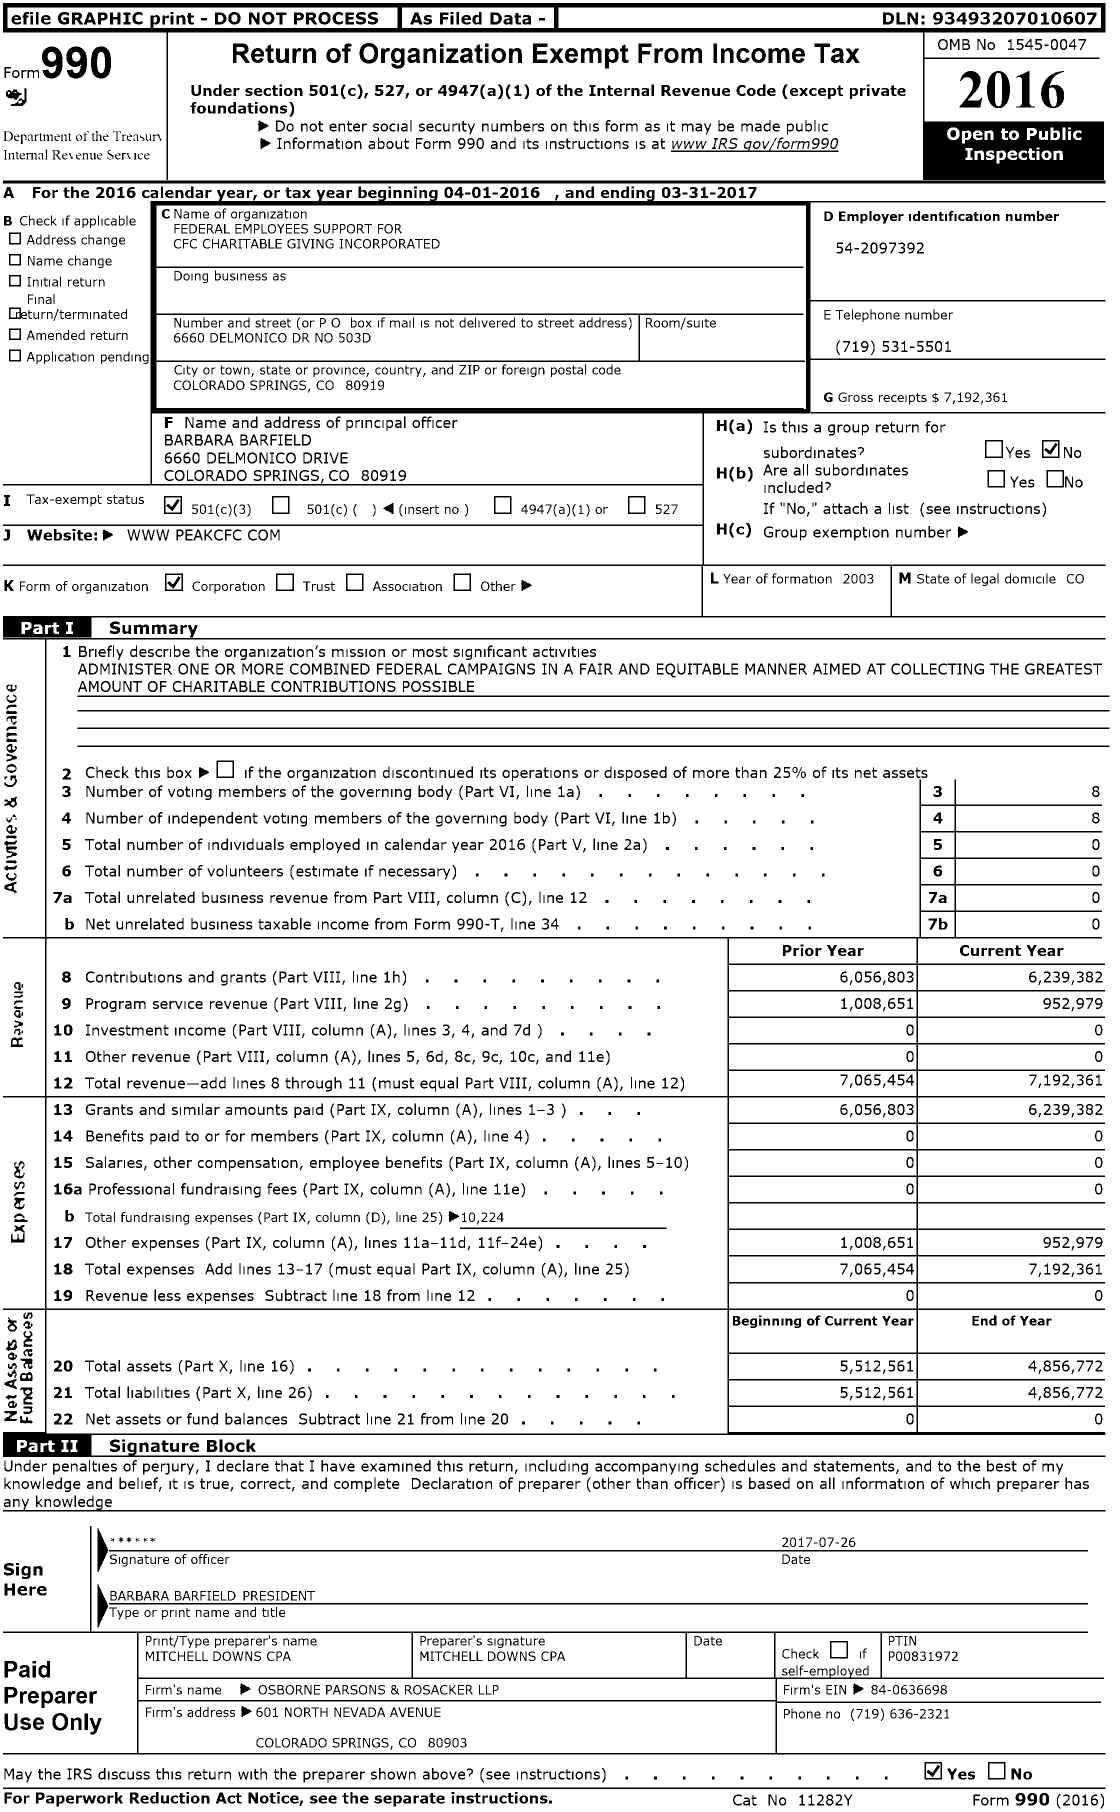 Image of first page of 2016 Form 990 for Federal Employees Support for CFC Charitable Giving Incorporated